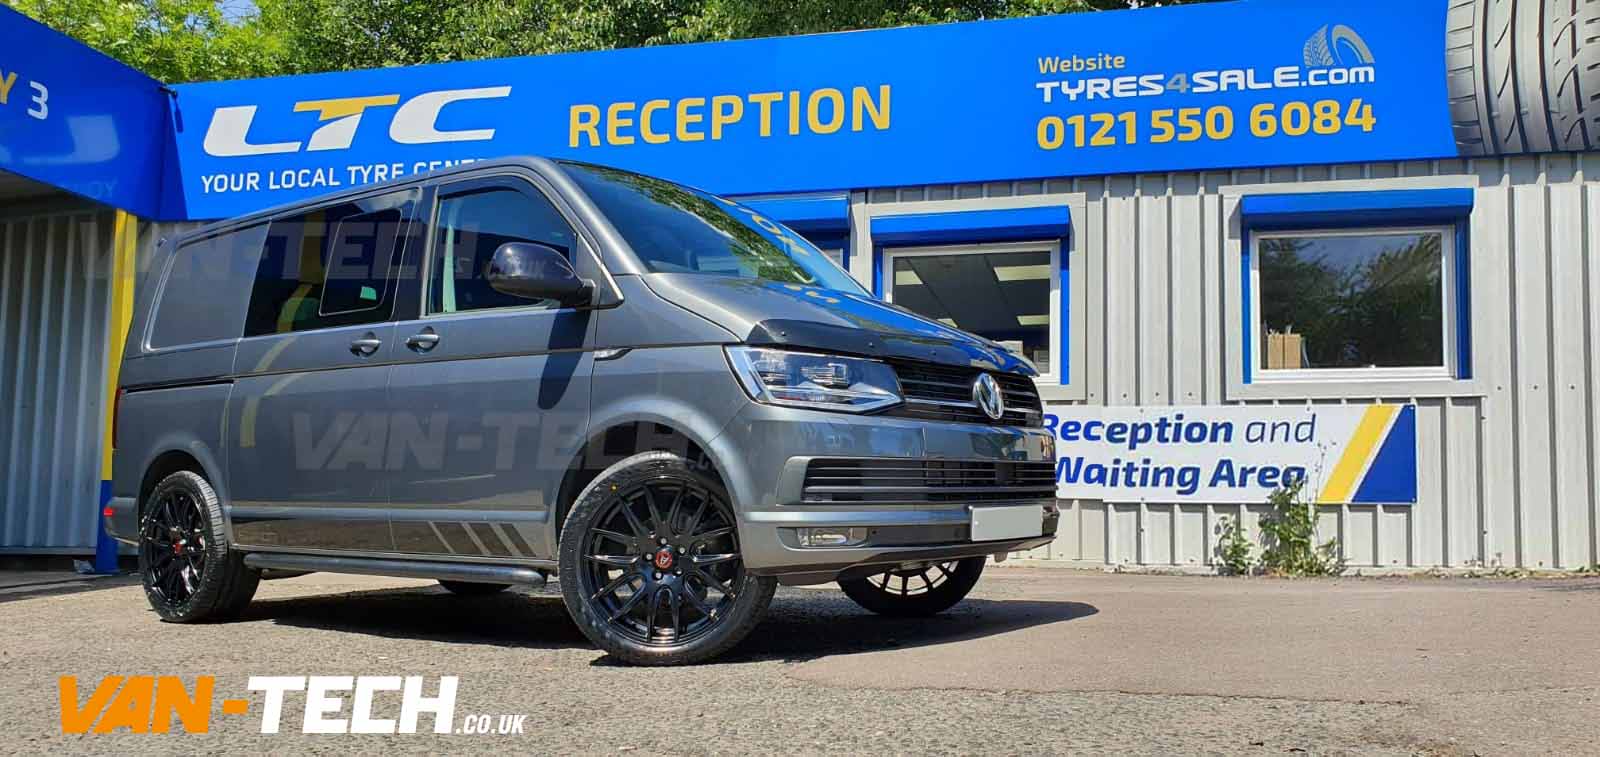 VW Transporter T6 Accessories including Alloy Wheels and Side Bars